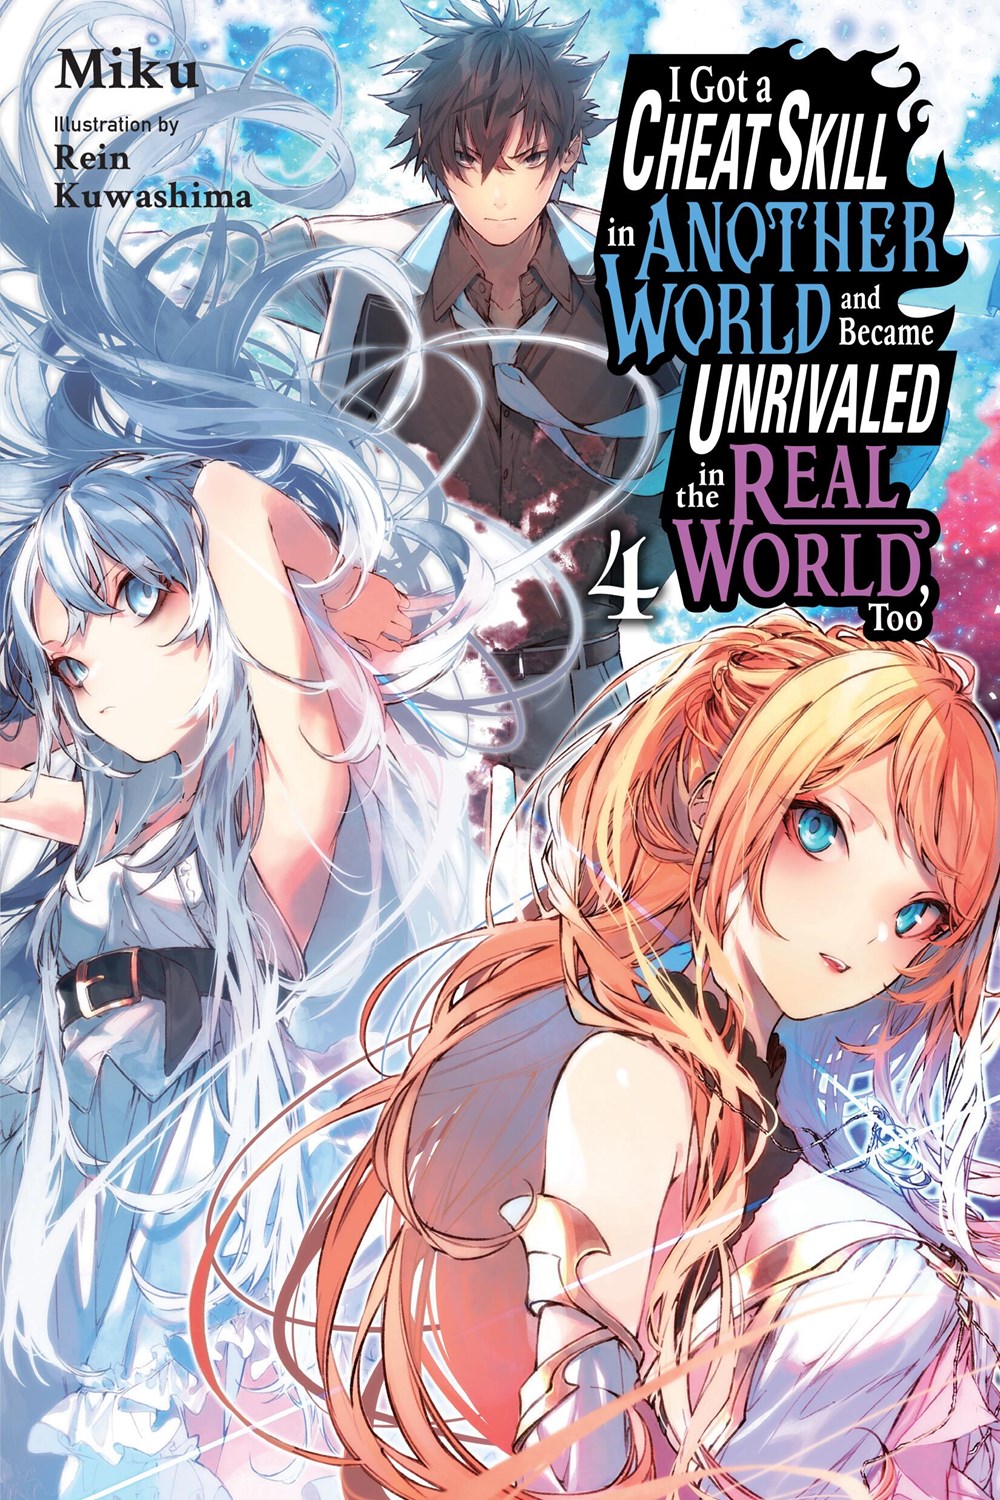 I Got a Cheat Skill in Another World and Became Unrivaled in The Real World  Light Novel Gets TV Anime - Crunchyroll News